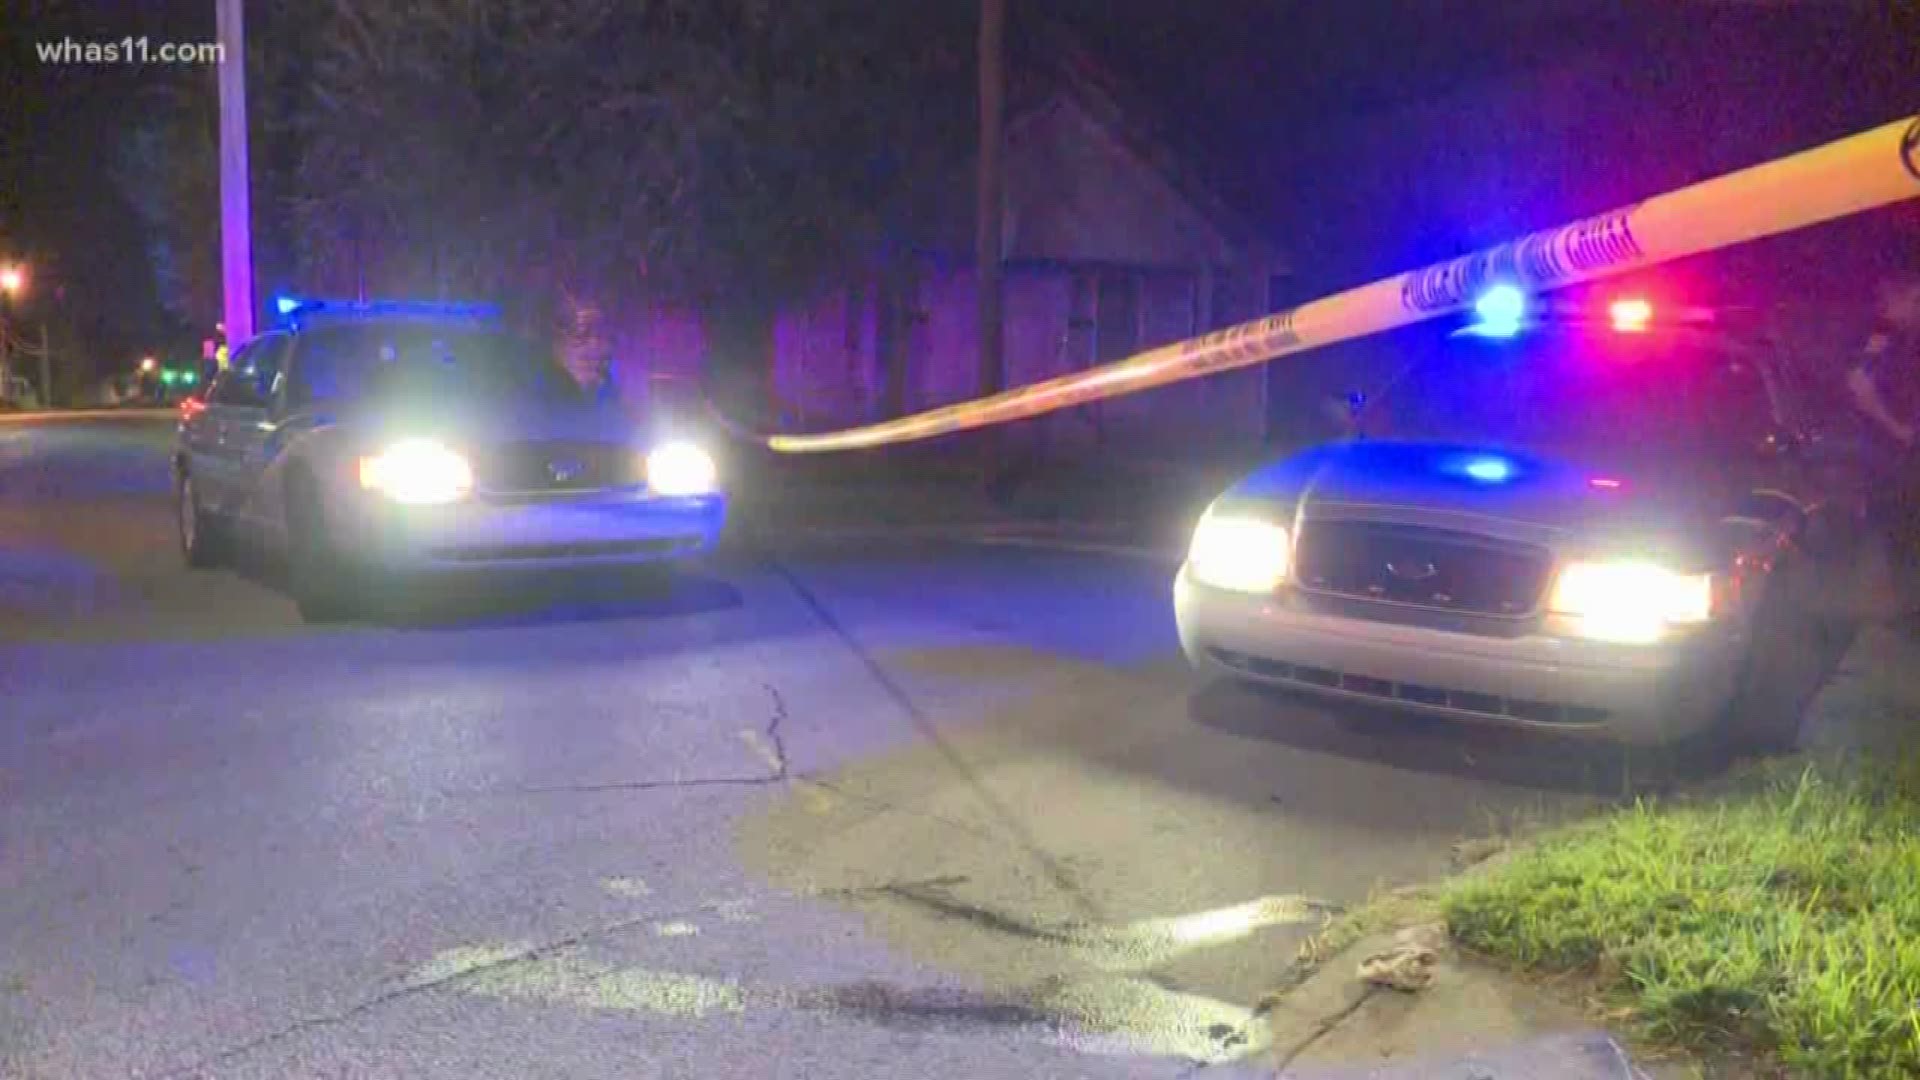 Police are investigating a fatal shooting and stabbing on Thursday evening